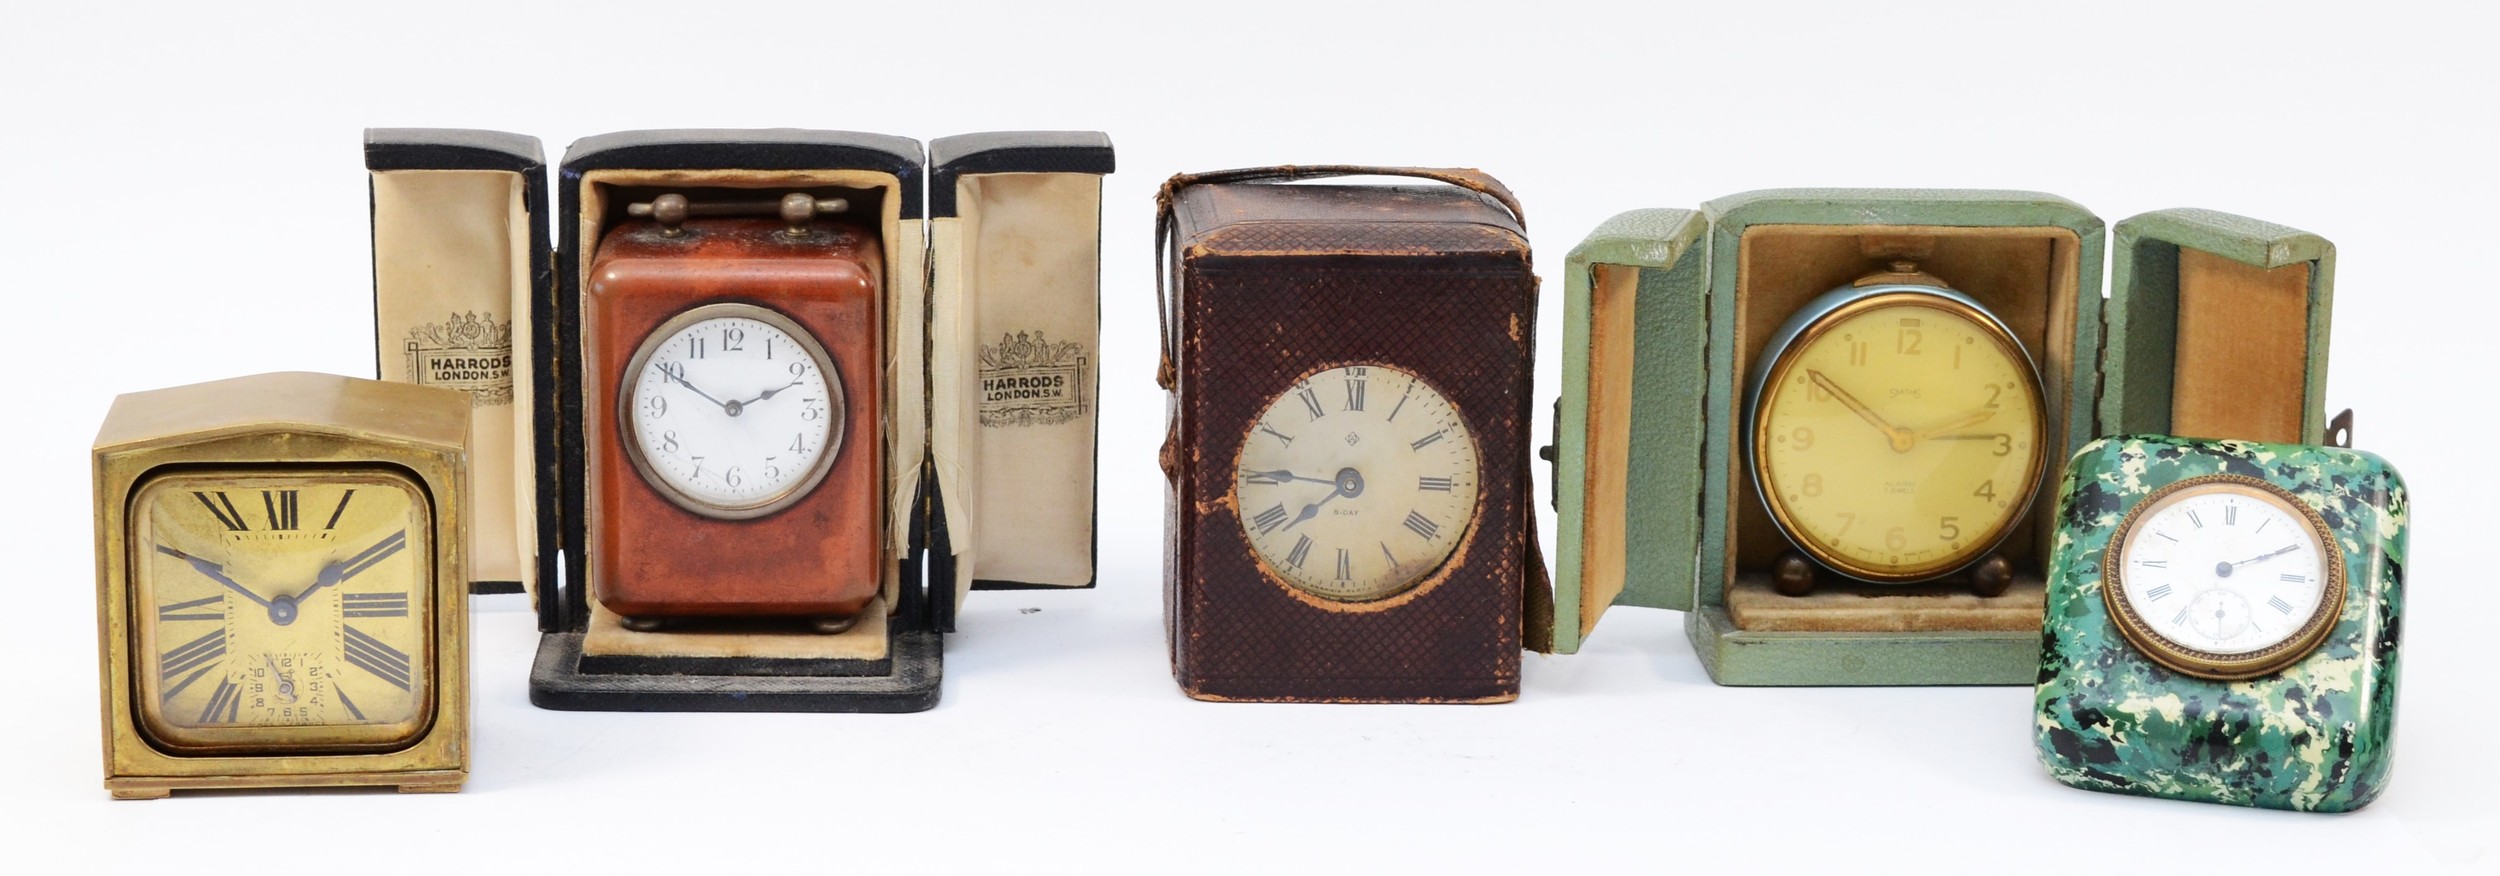 A collection of five bedside/traveling clocks, circa 1920s-50s, having manual wind movements,